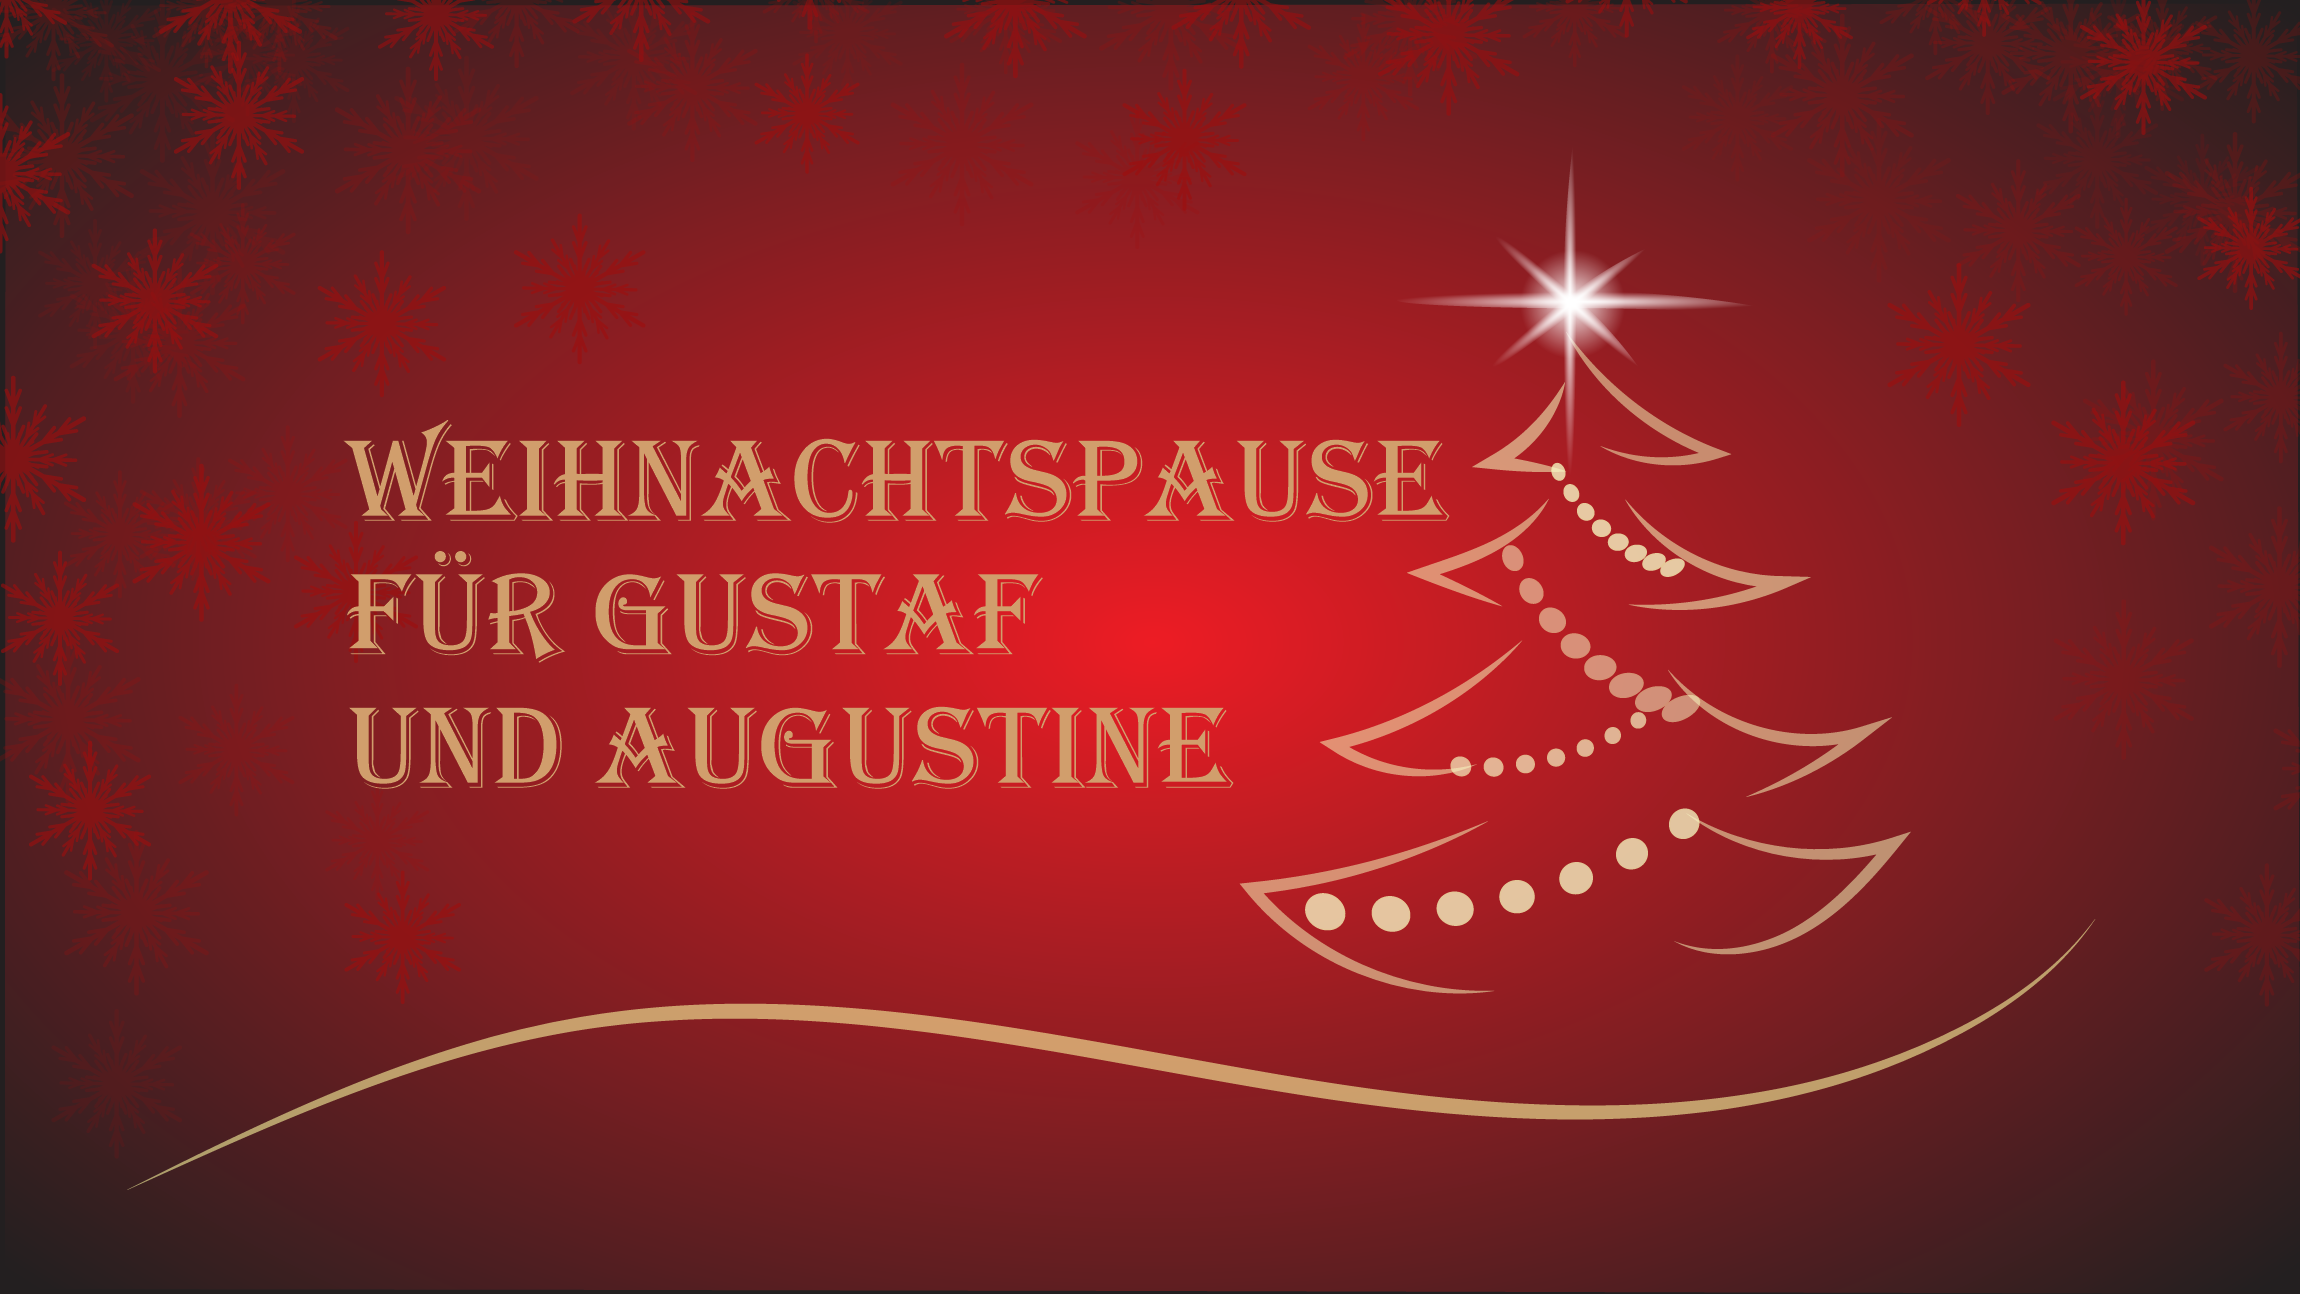 Read more about the article Weihnachtspause für Gustaf